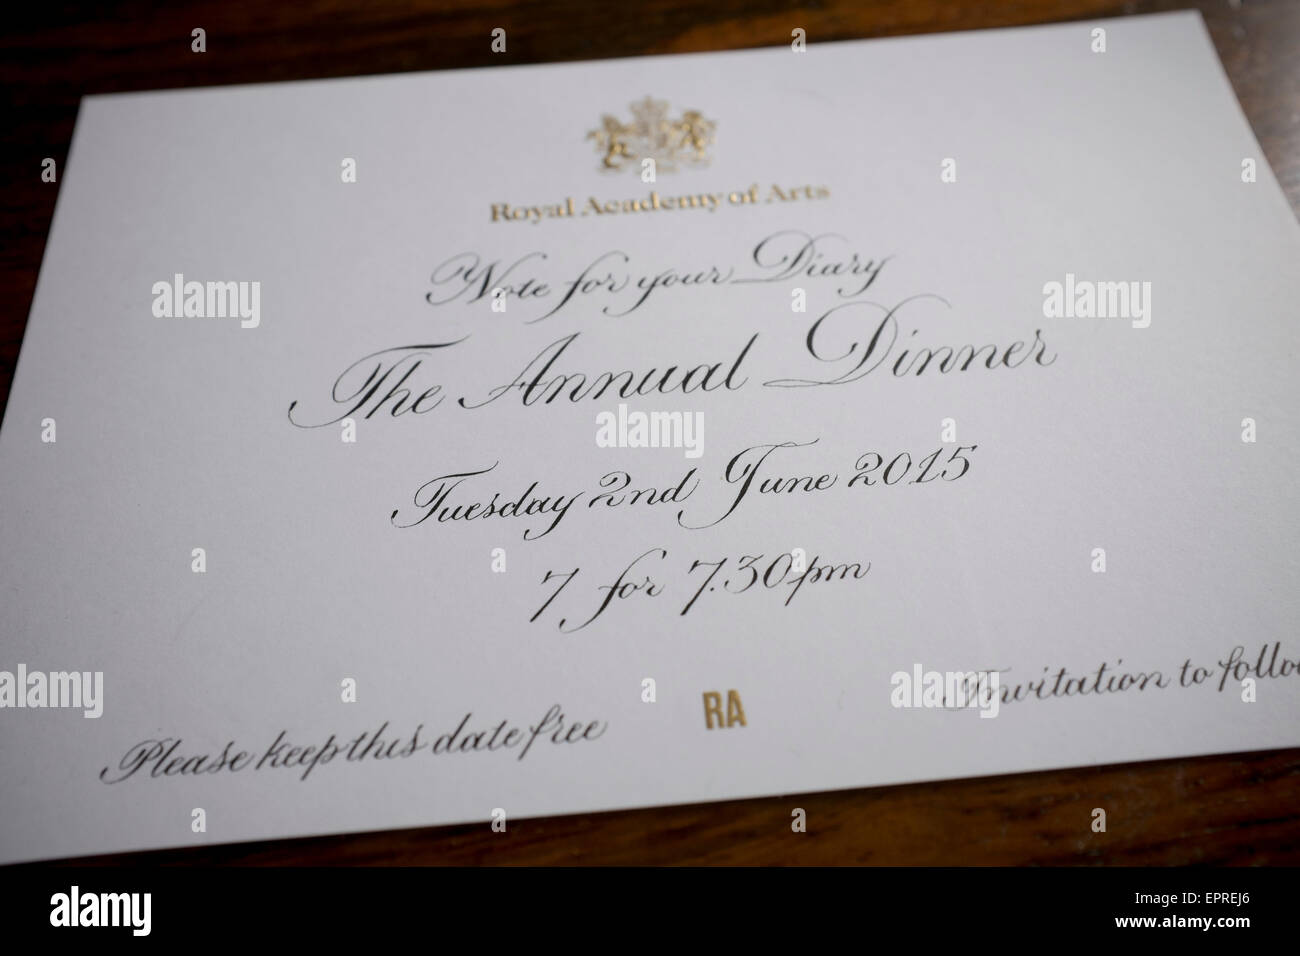 Invitation to the Royal Academy Annual Dinner Stock Photo